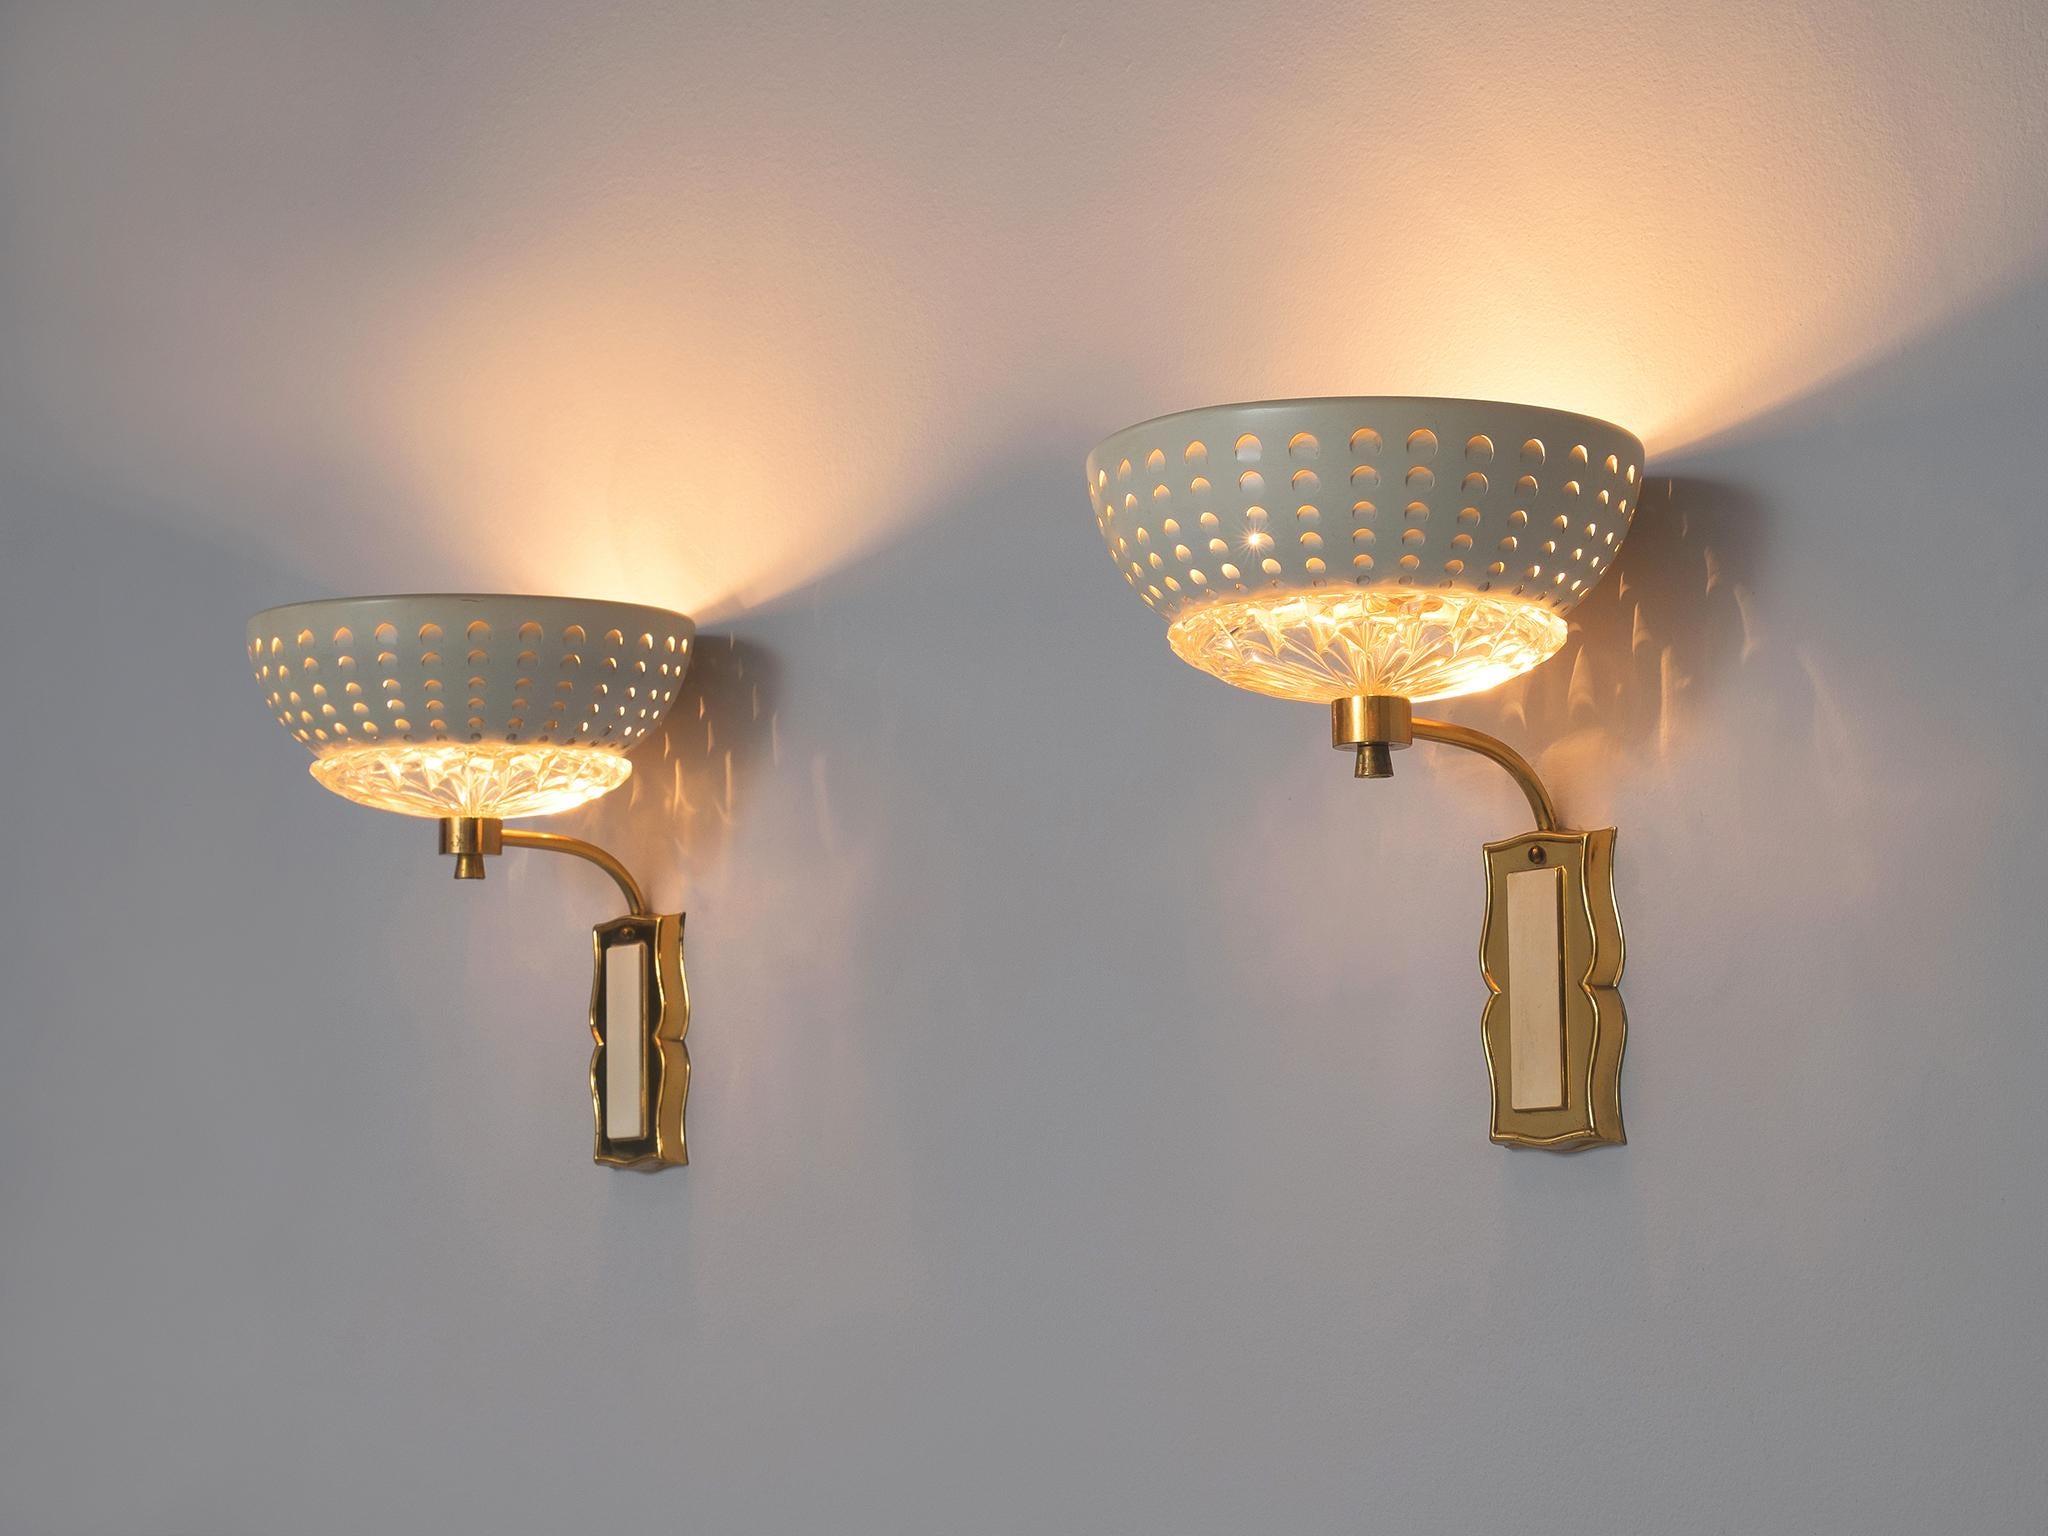 Pair of wall lights, in brass, glass and metal, Europe, 1970s. 

Elegant pair of wall lights in brass. The brass fixture holds an arch on which the bowl shaped lights are mounted. Each light consist of a small structured glass scale, with on top a